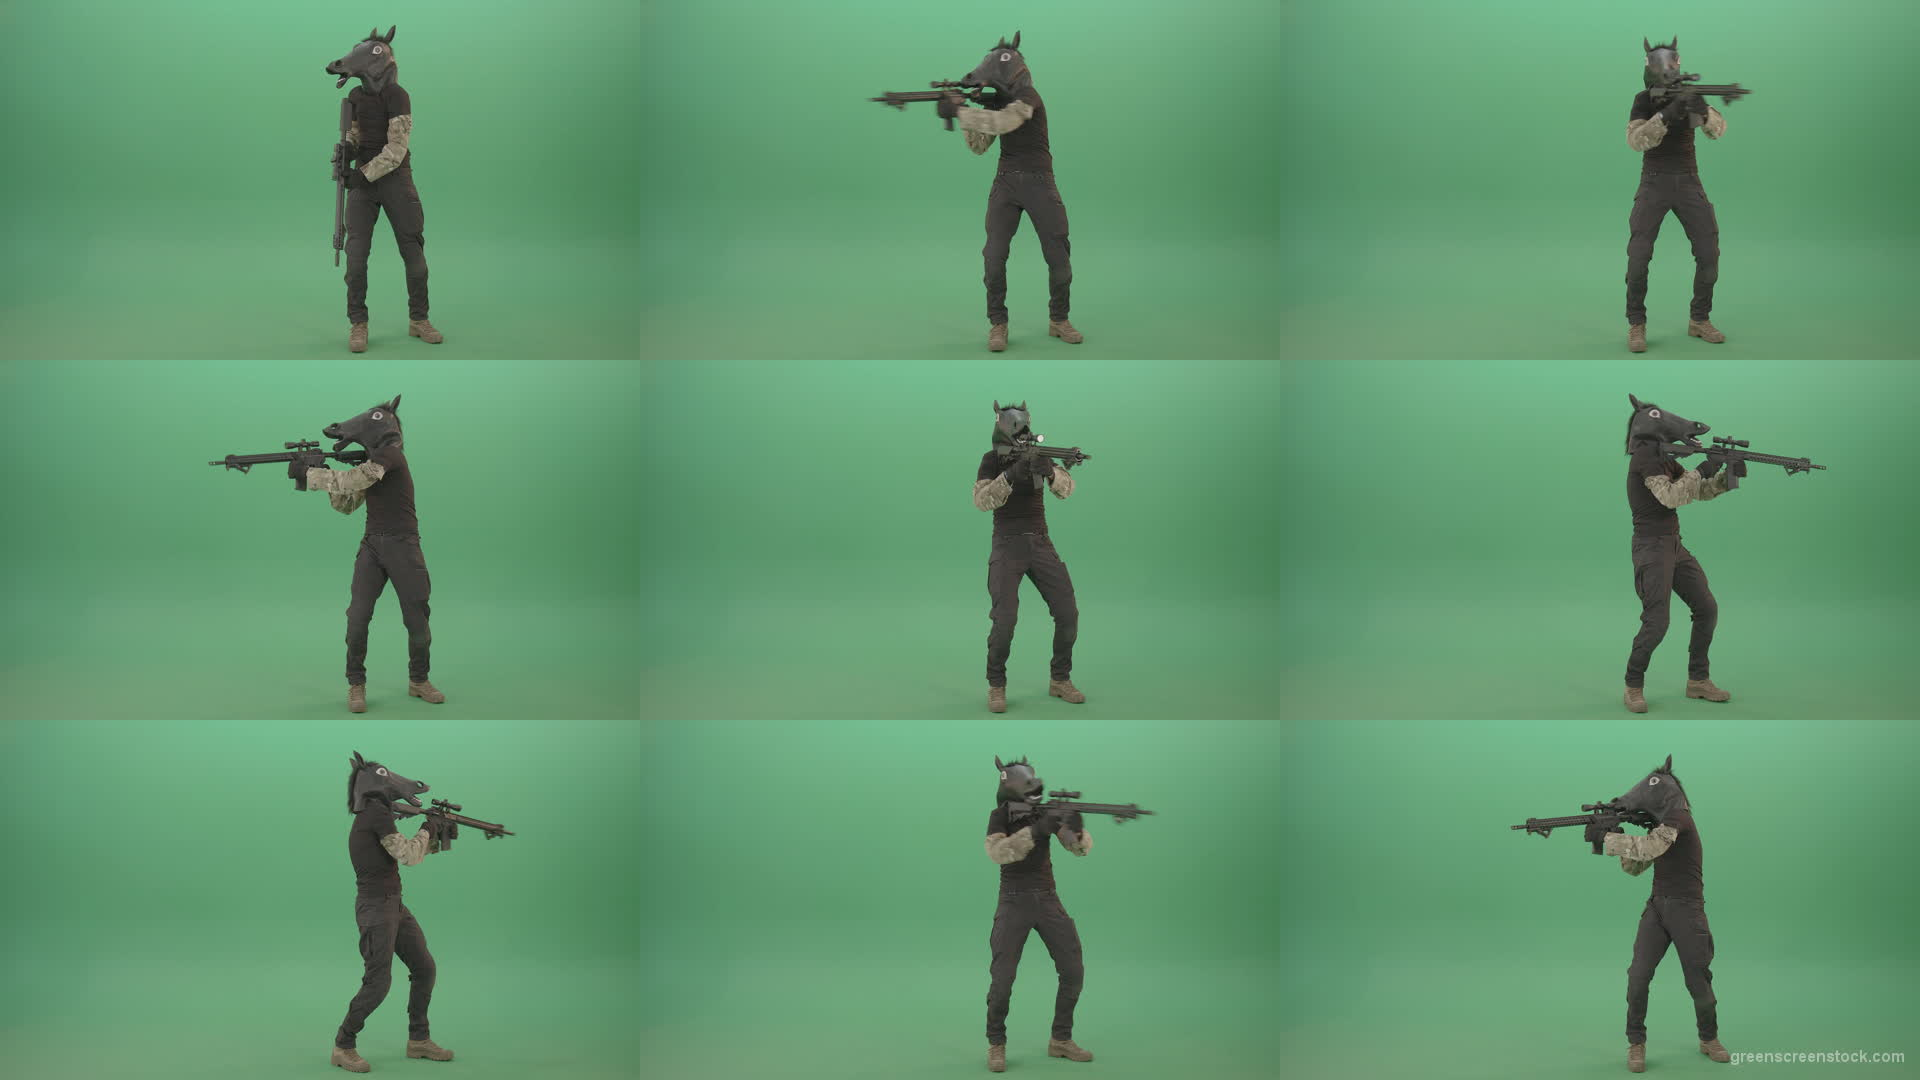 Front-view-Army-Man-in-horse-mask-shooting-from-Machine-Gun-isolated-on-Chromakey-Green-Screen-4K-Video-Footage-1920 Green Screen Stock